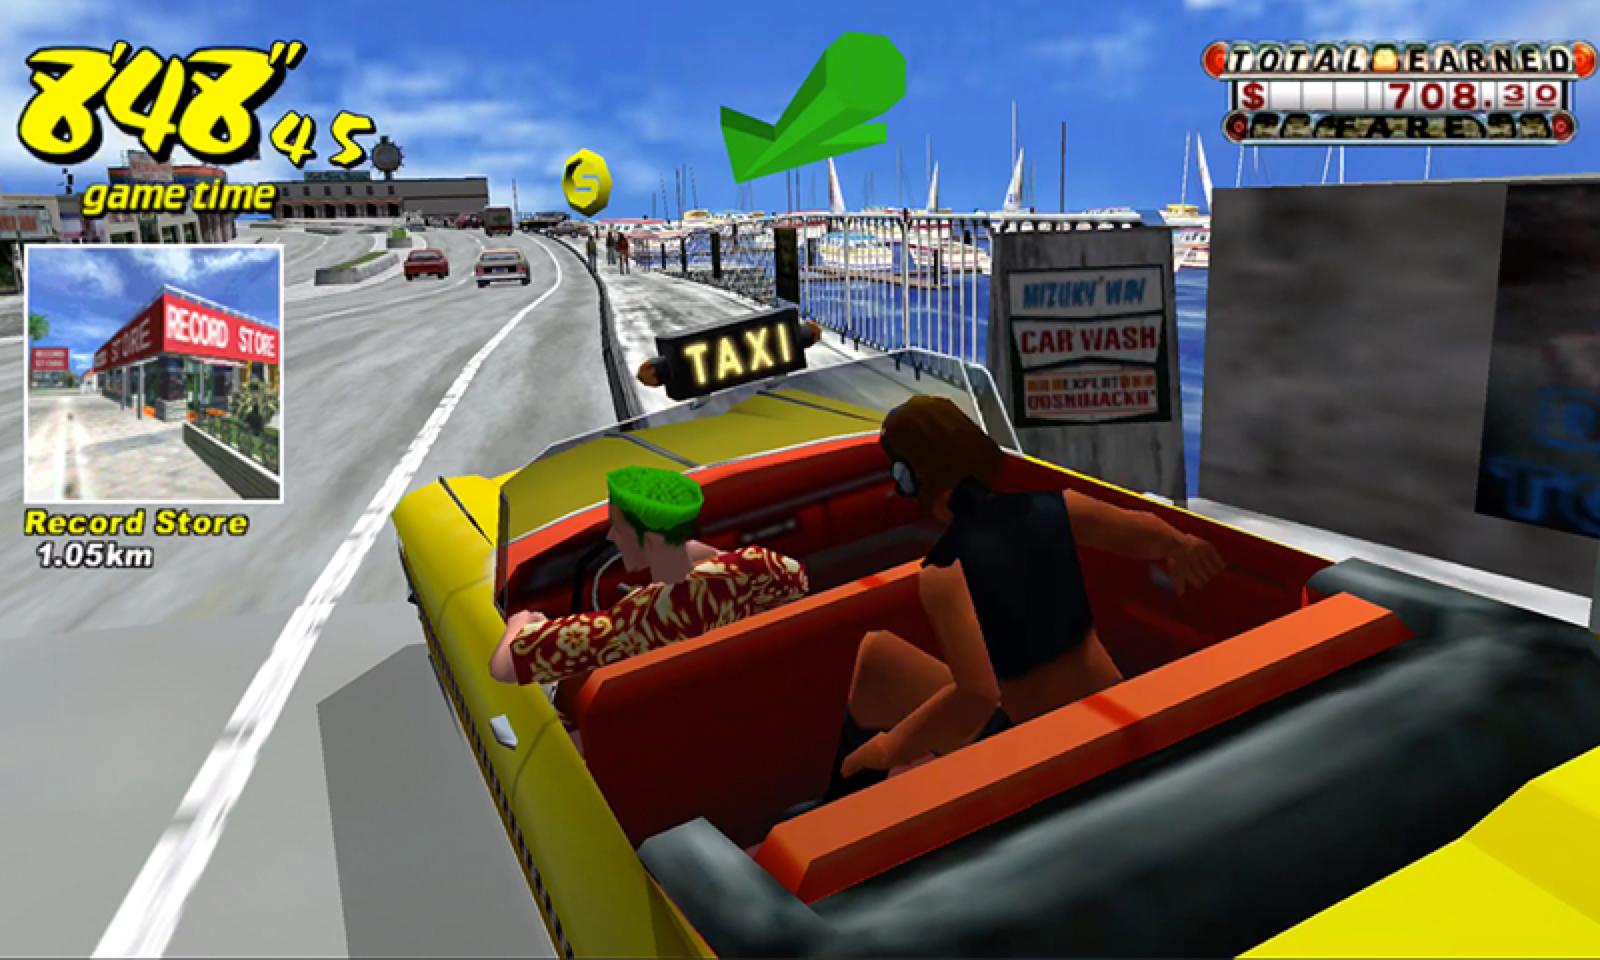 Screenshot of a Crazy Taxi from the back with passengers riding in there